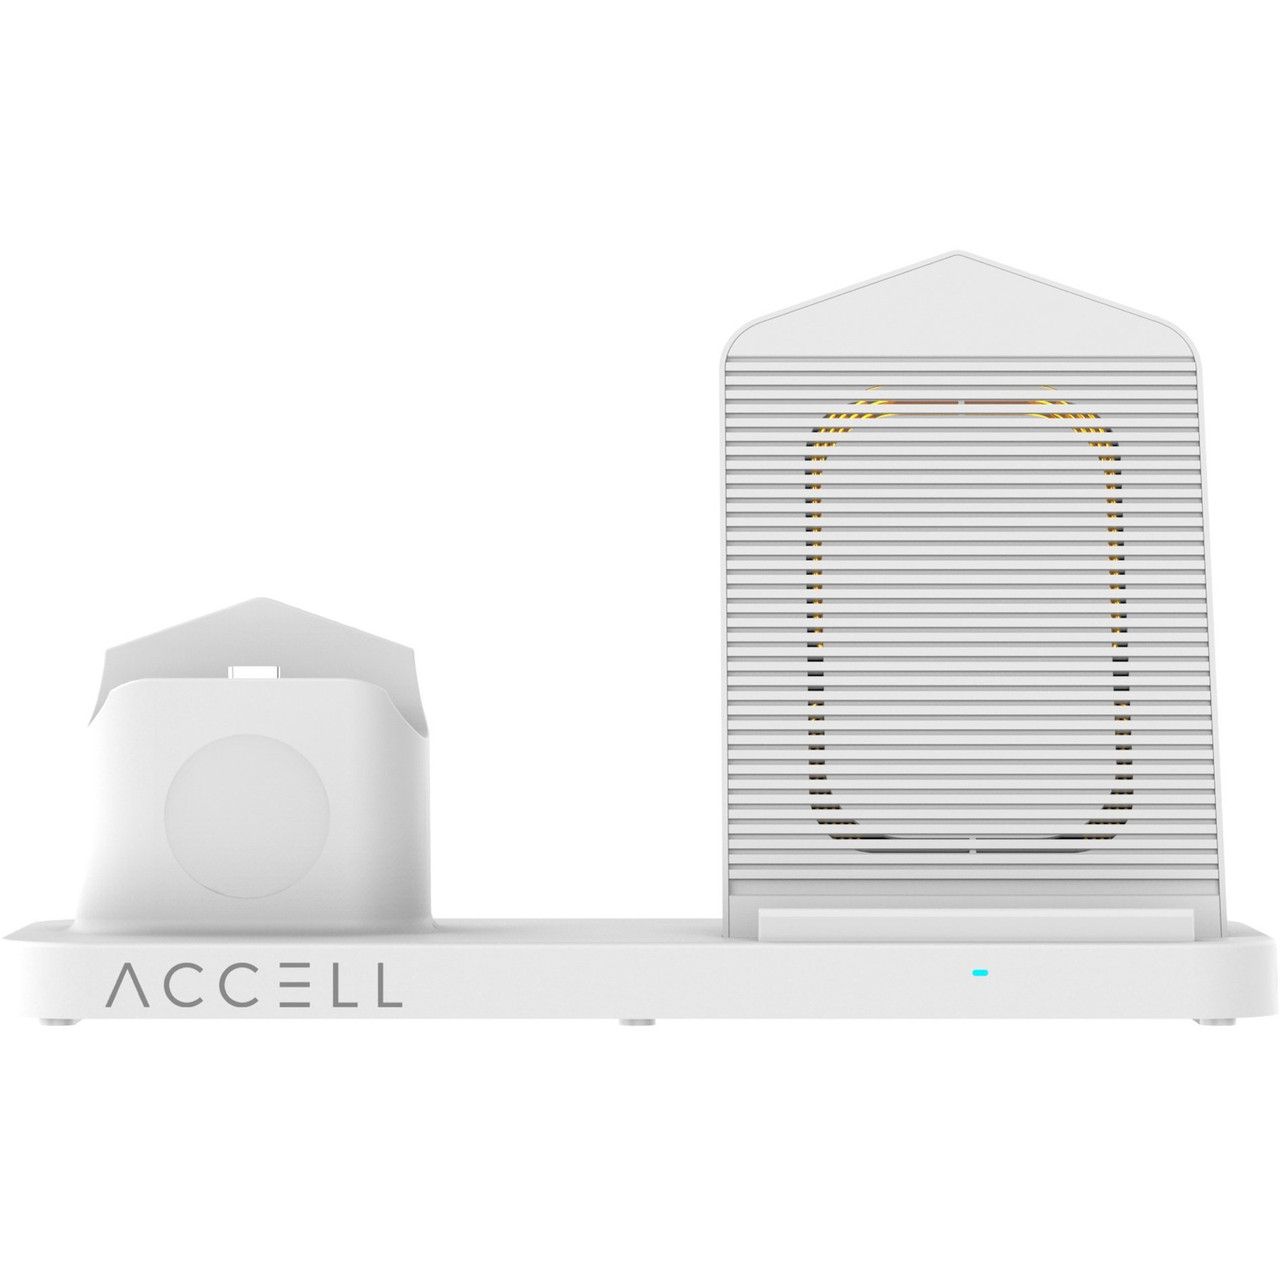 Accell 3 in 1 Fast Wireless Charger for smartphone, Apple watch, and Airpods - D233B-001F